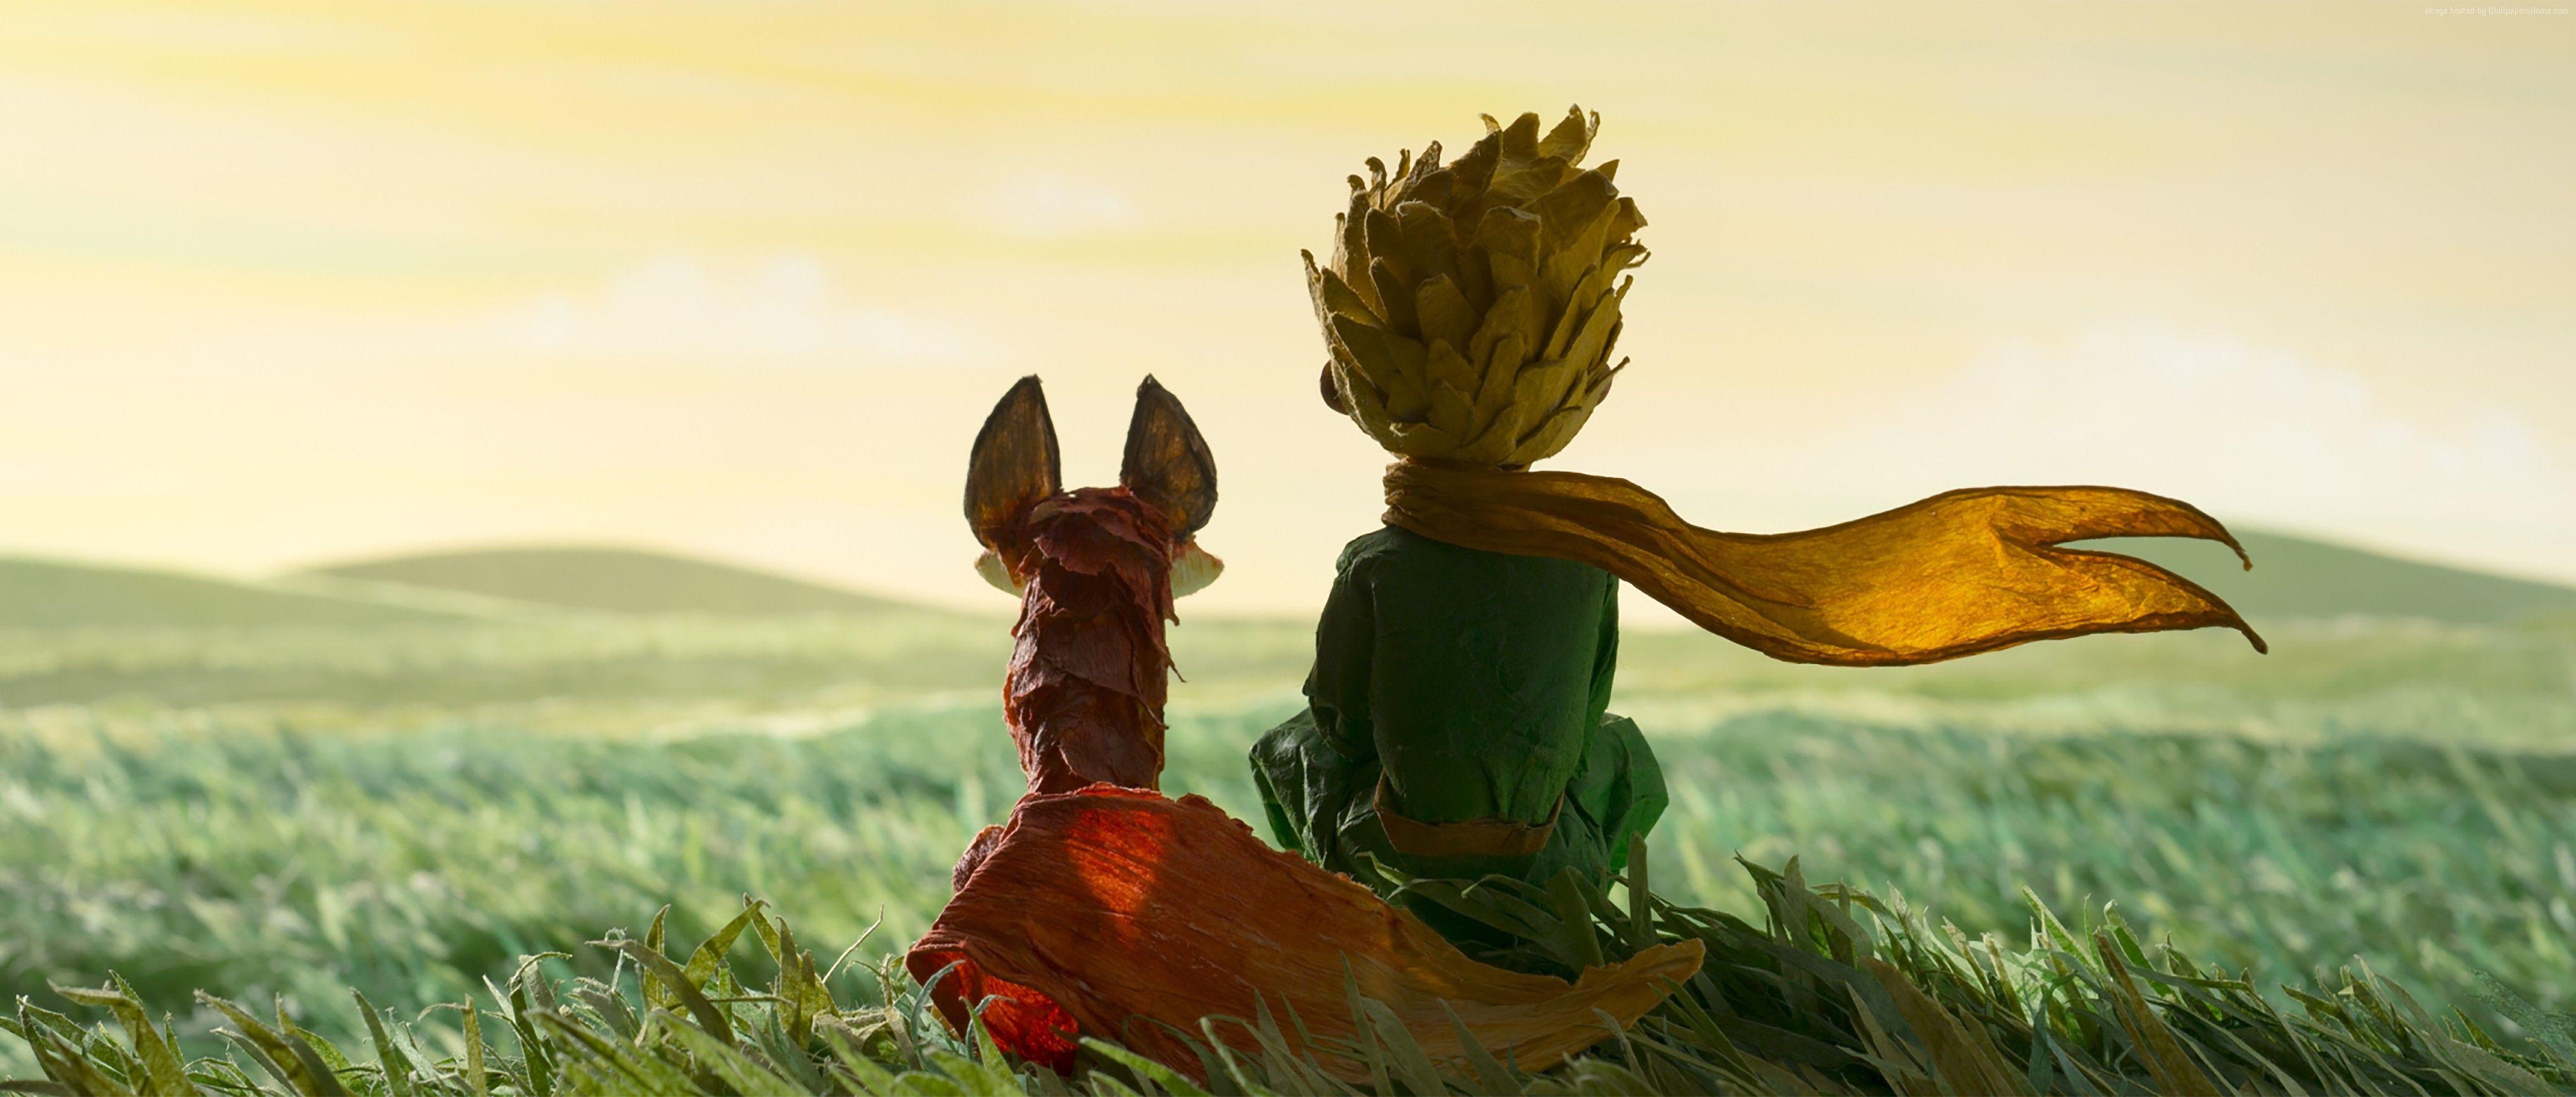 the little prince movie download free